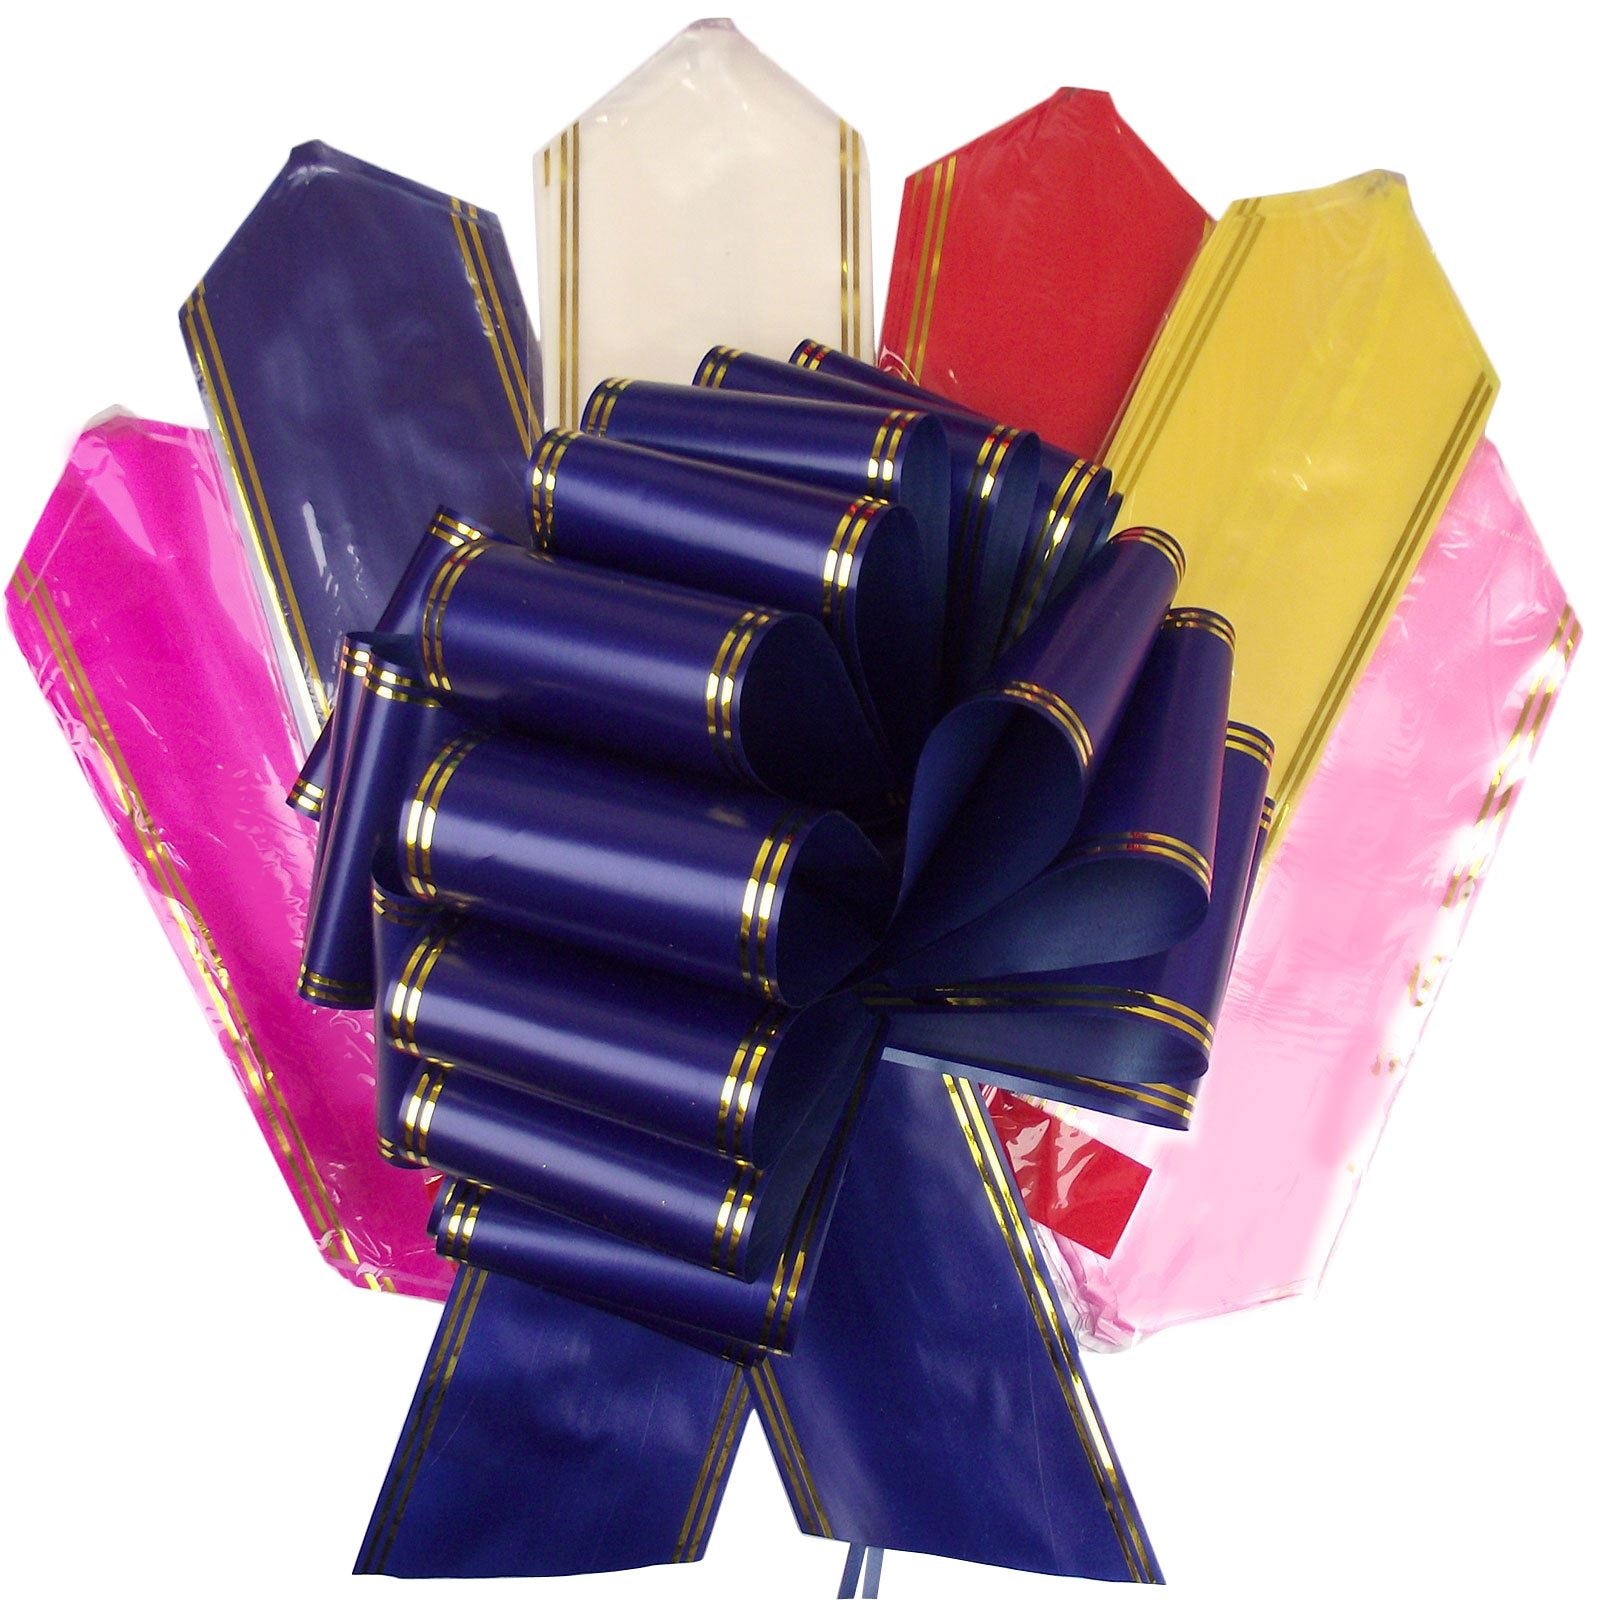 XXL Giant Pullbows Set of 6